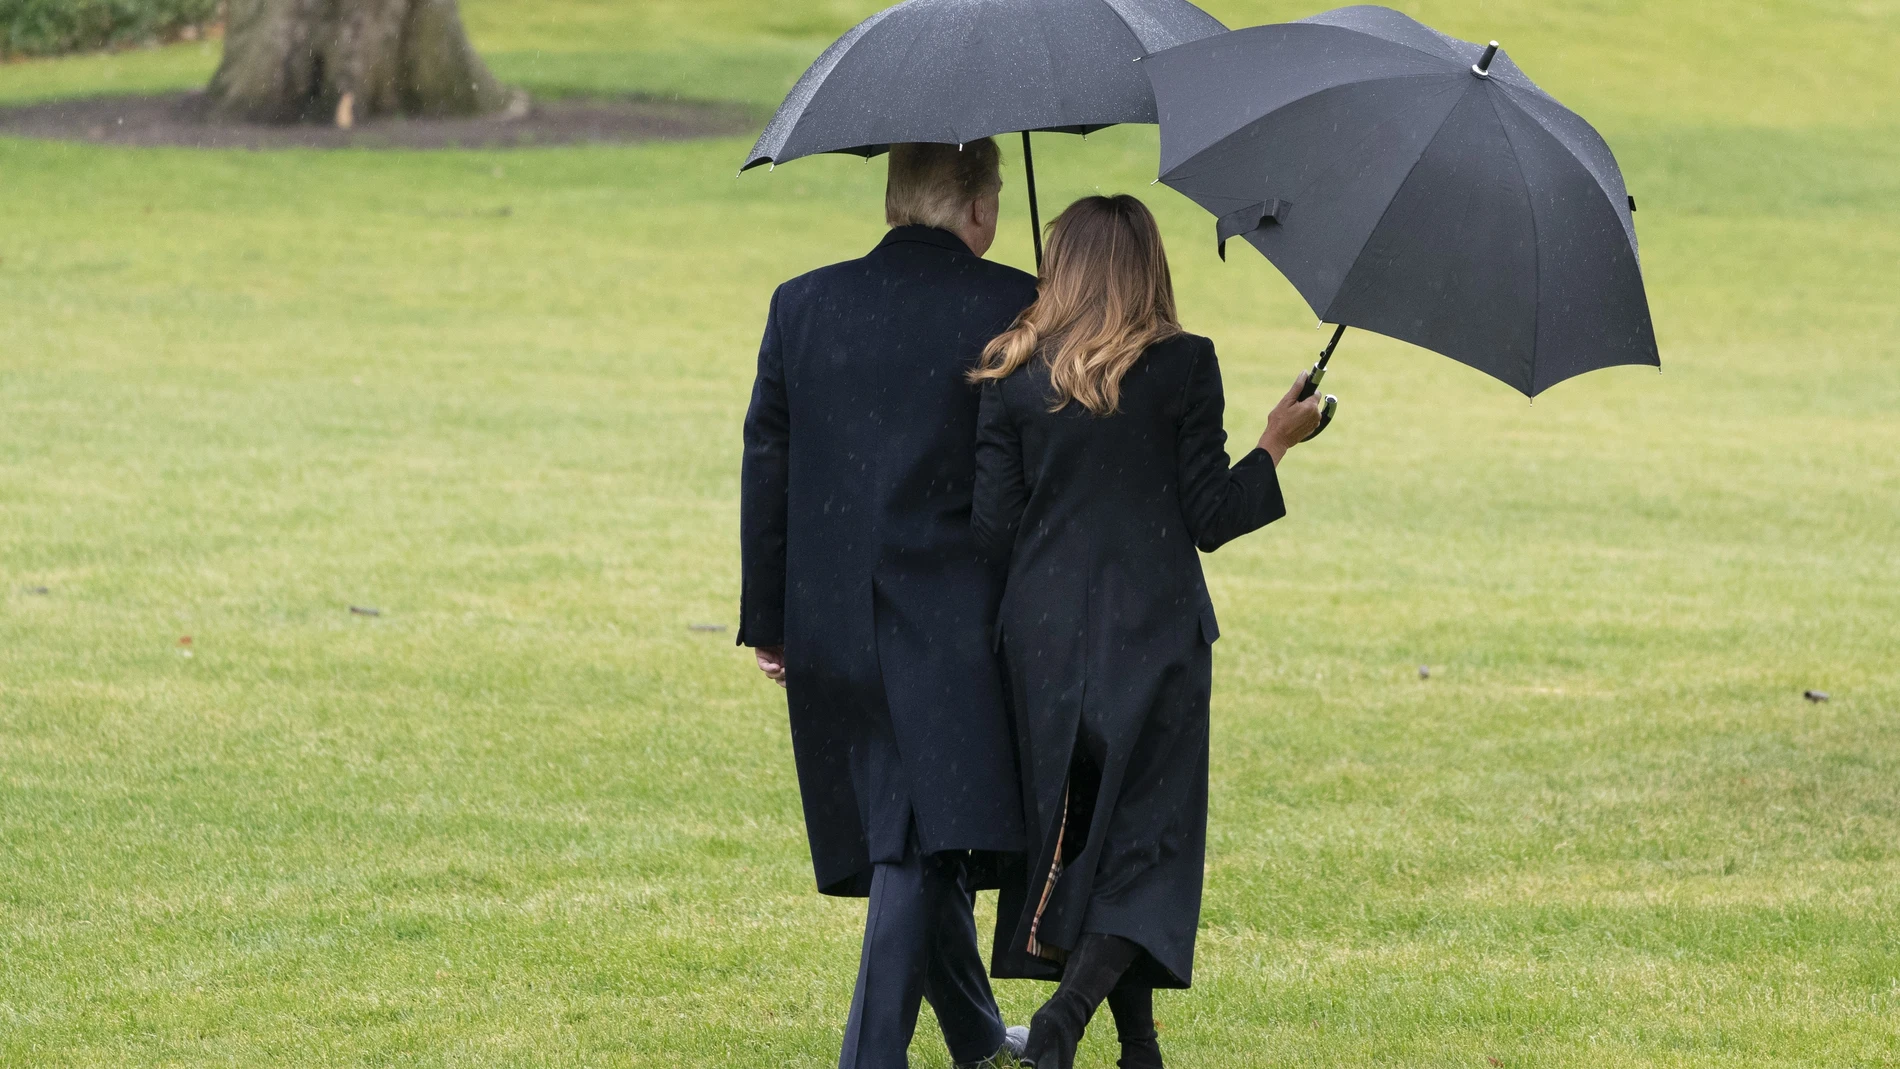 Trump and First lady depart for London